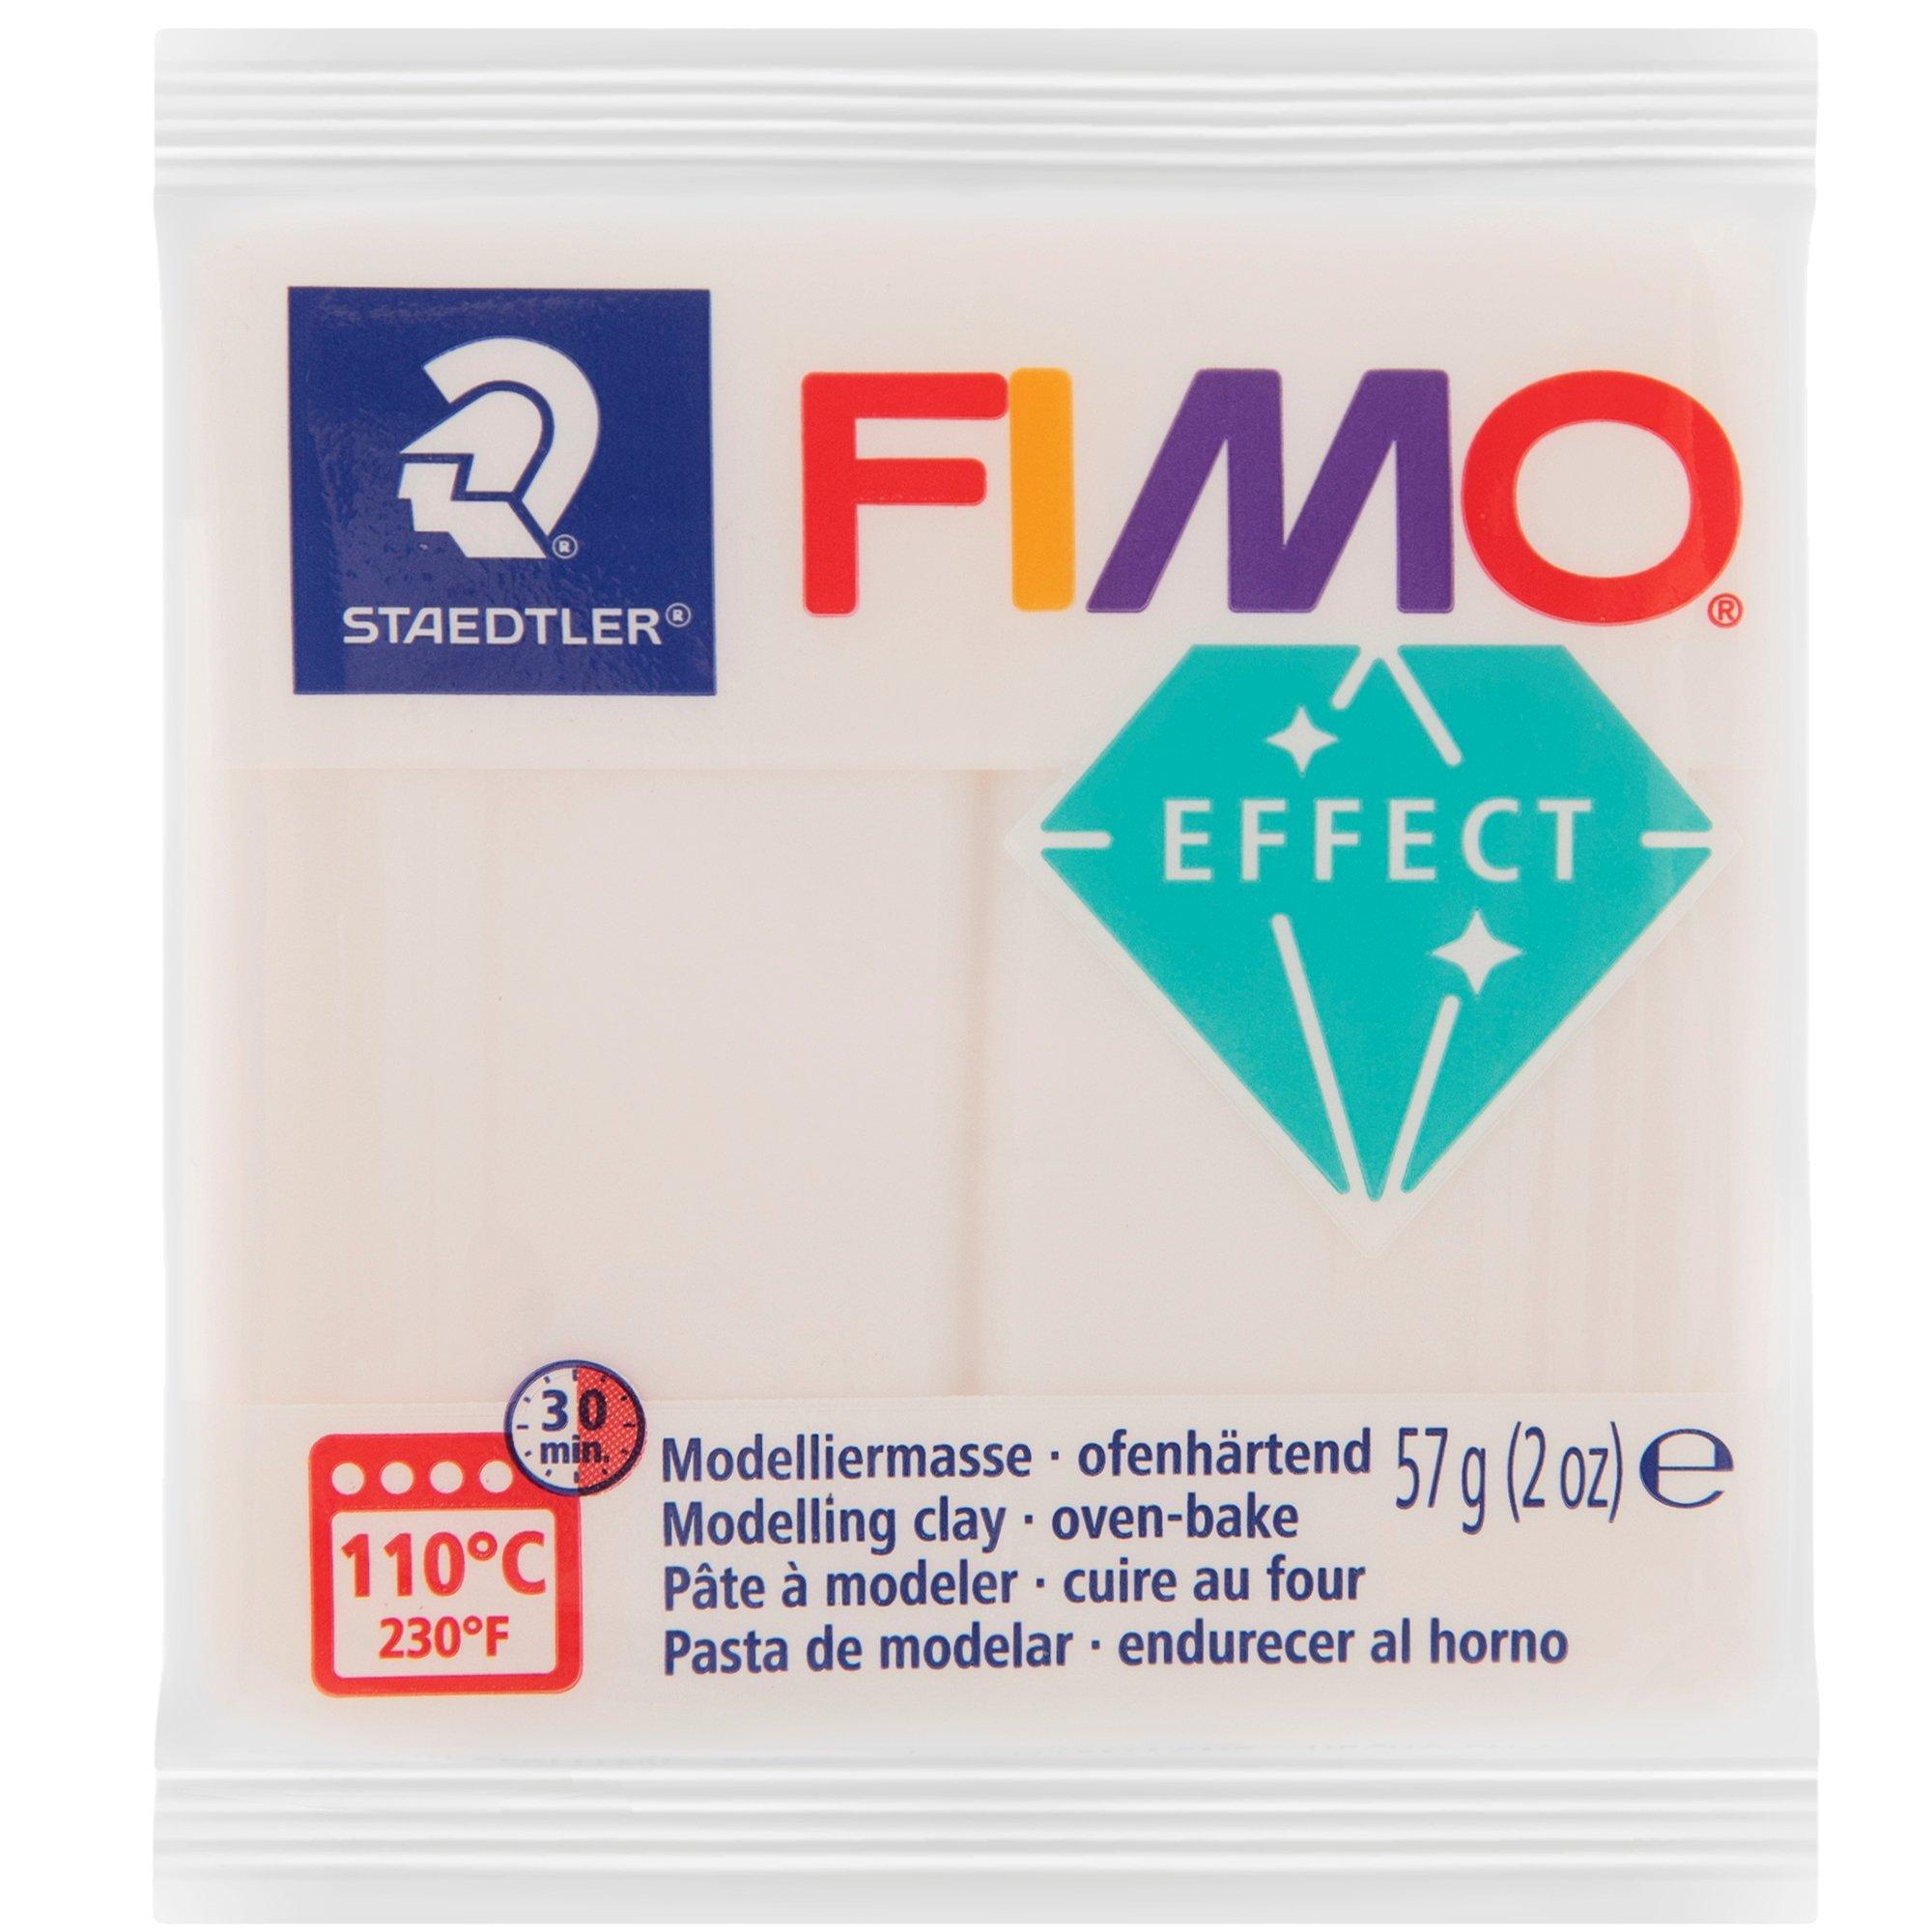 Staedtler Fimo Effect Polymer Clay